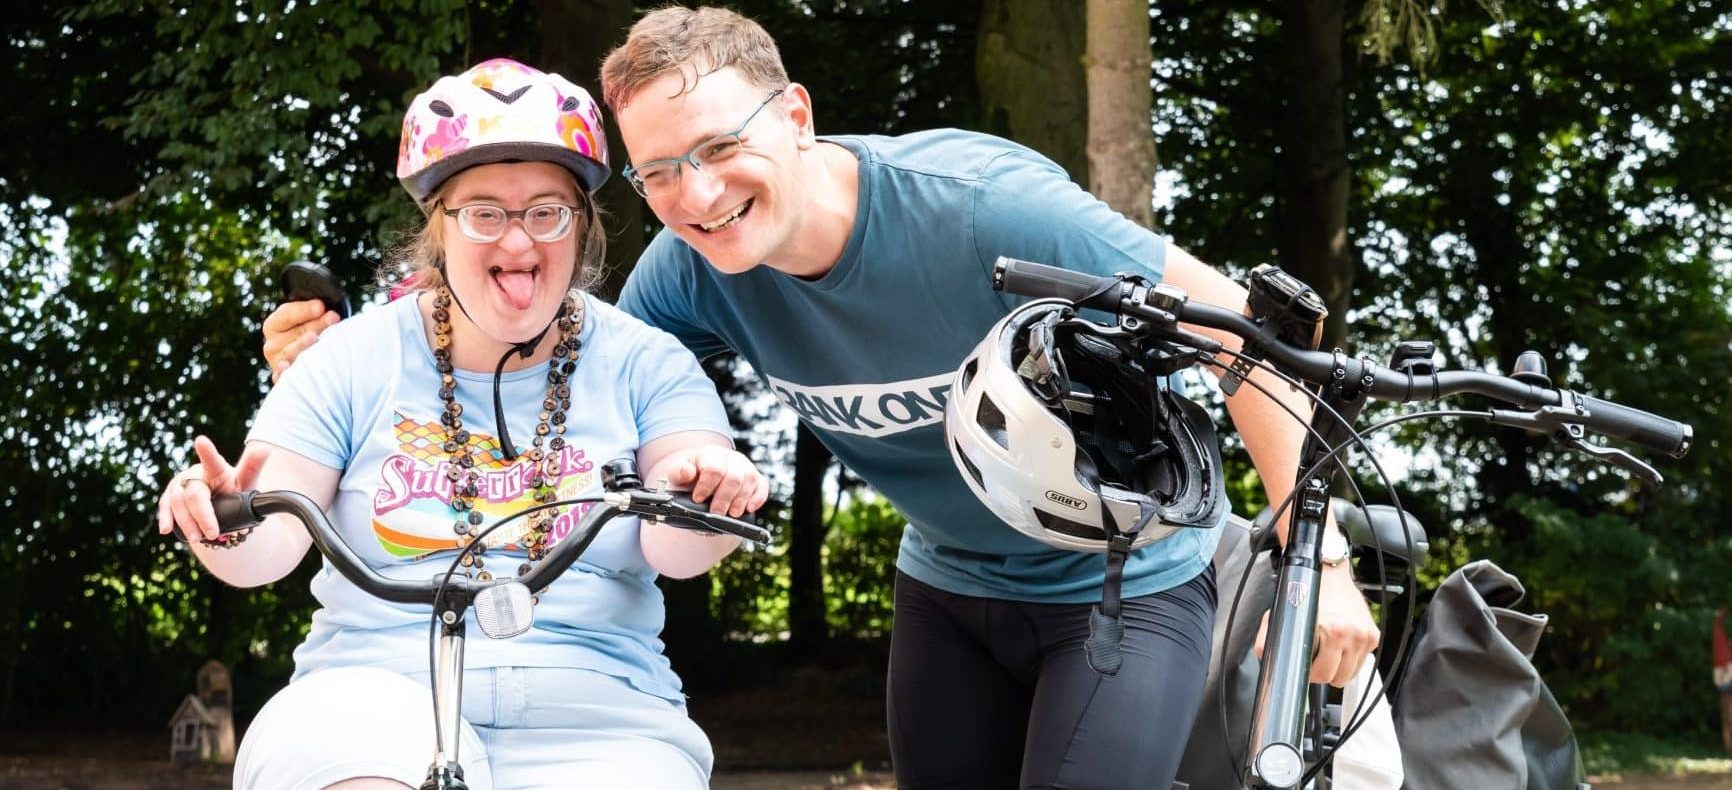 Woman with Down syndrome and her brother riding bikes in a park